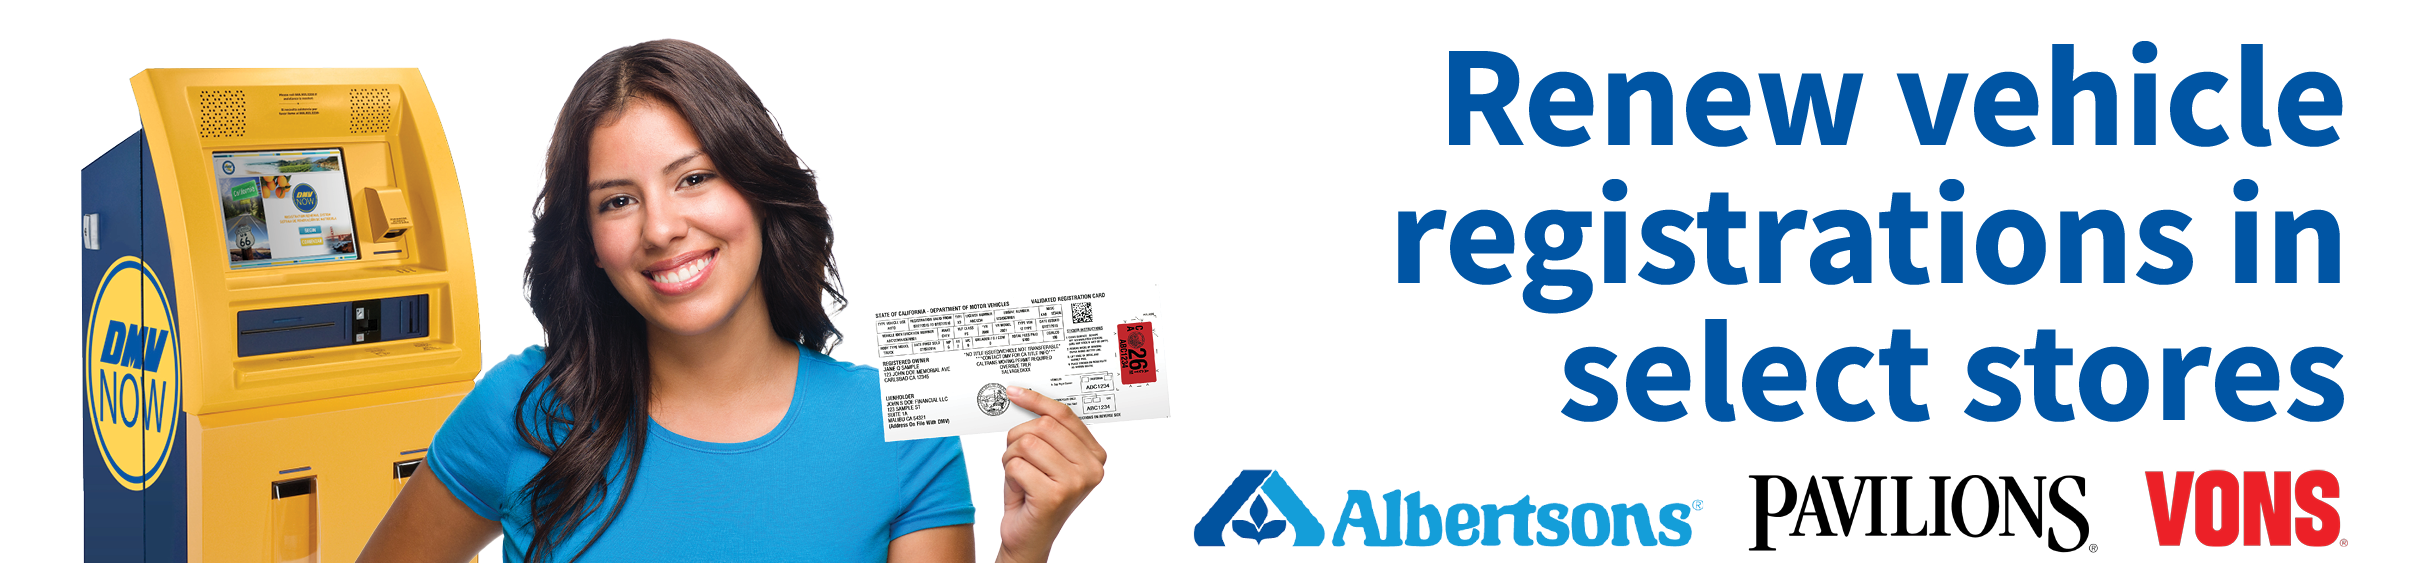 Renew vehicle registrations in select Albertsons, Pavilions, and Vons locations